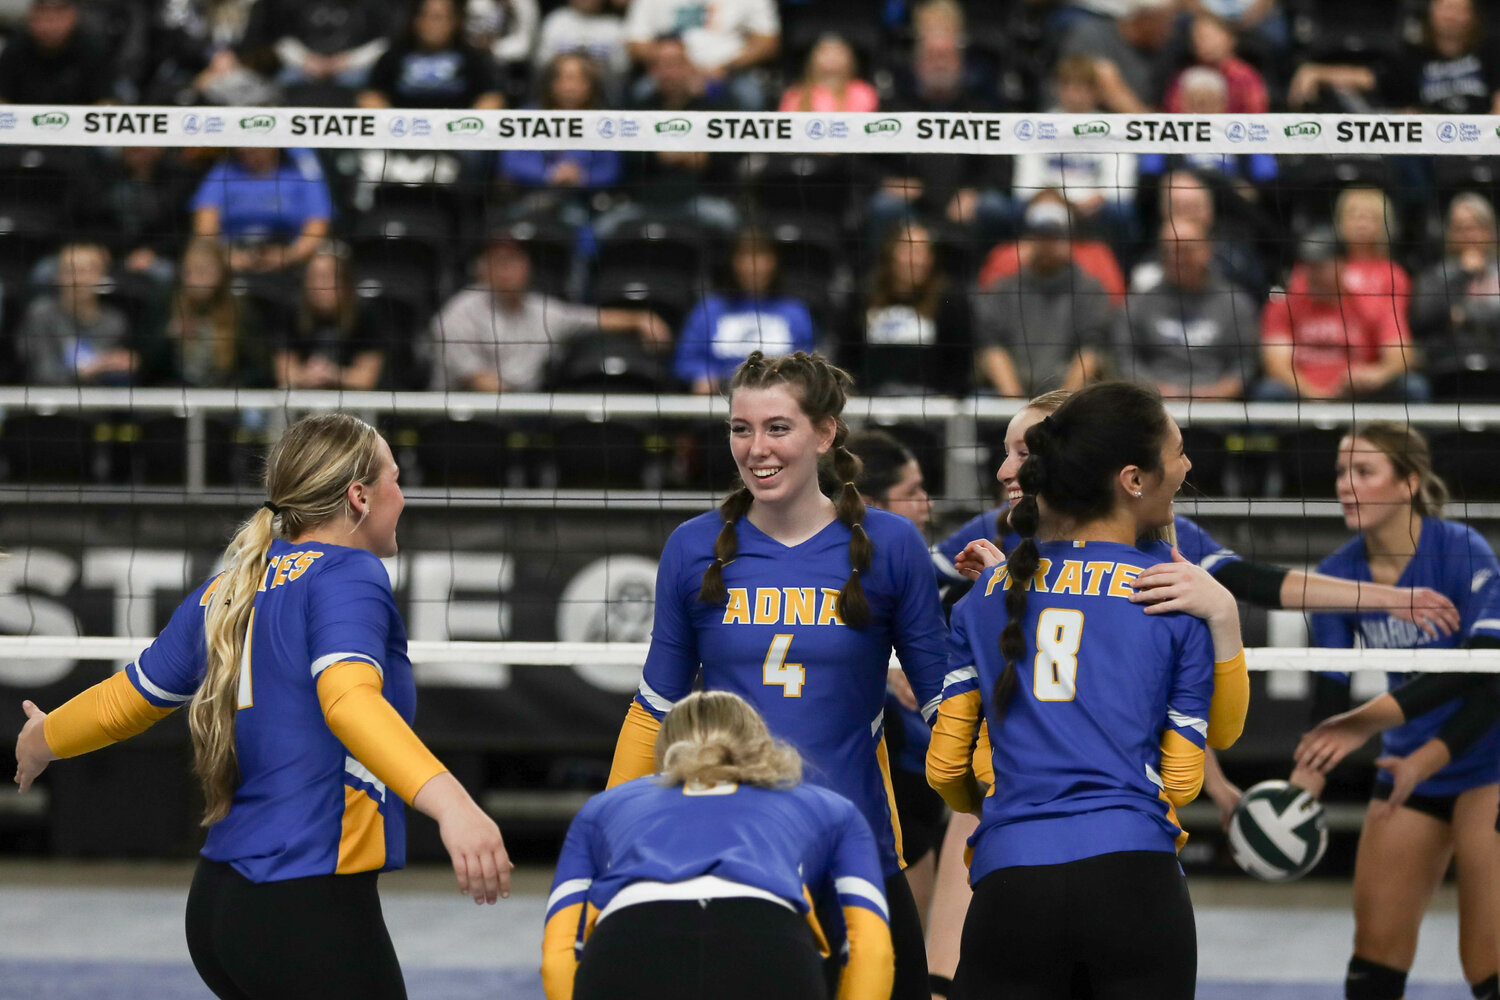 The Adna Pirates celebrate after defeating Warden in the first round of the state tournament on Nov,. 8 in Yakima.